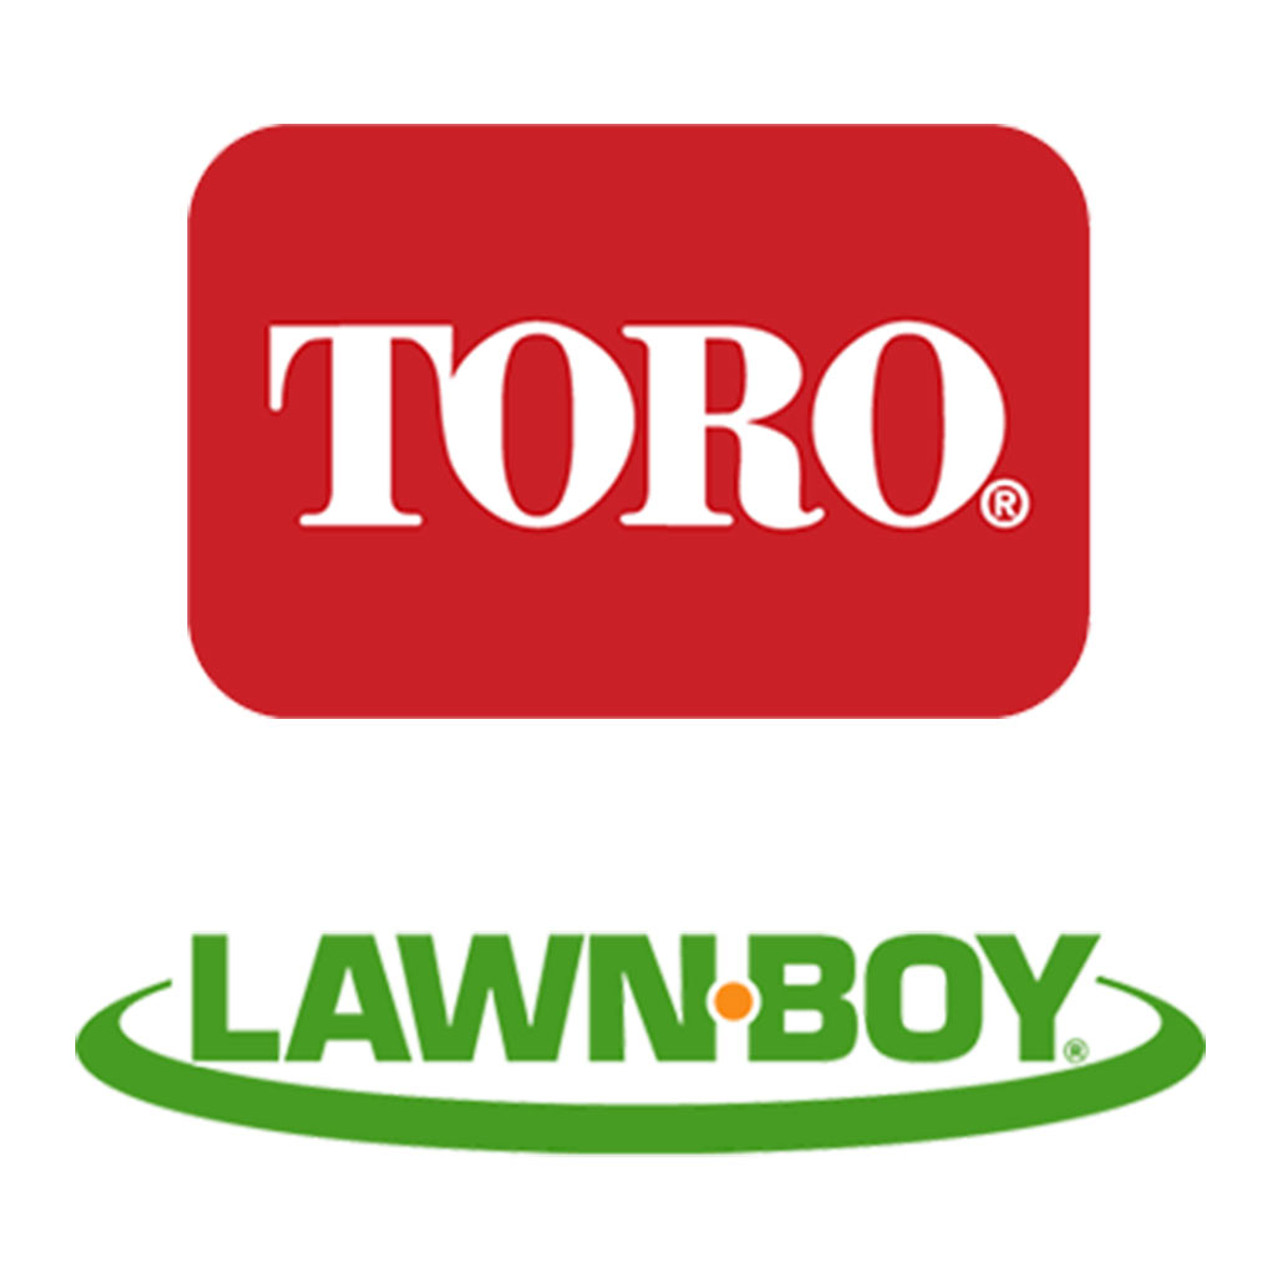 Toro Lawn-Boy 139-3690 Frame (Asm Compact 2 Stage 24In W/Decal) (Replaces 131-6468)